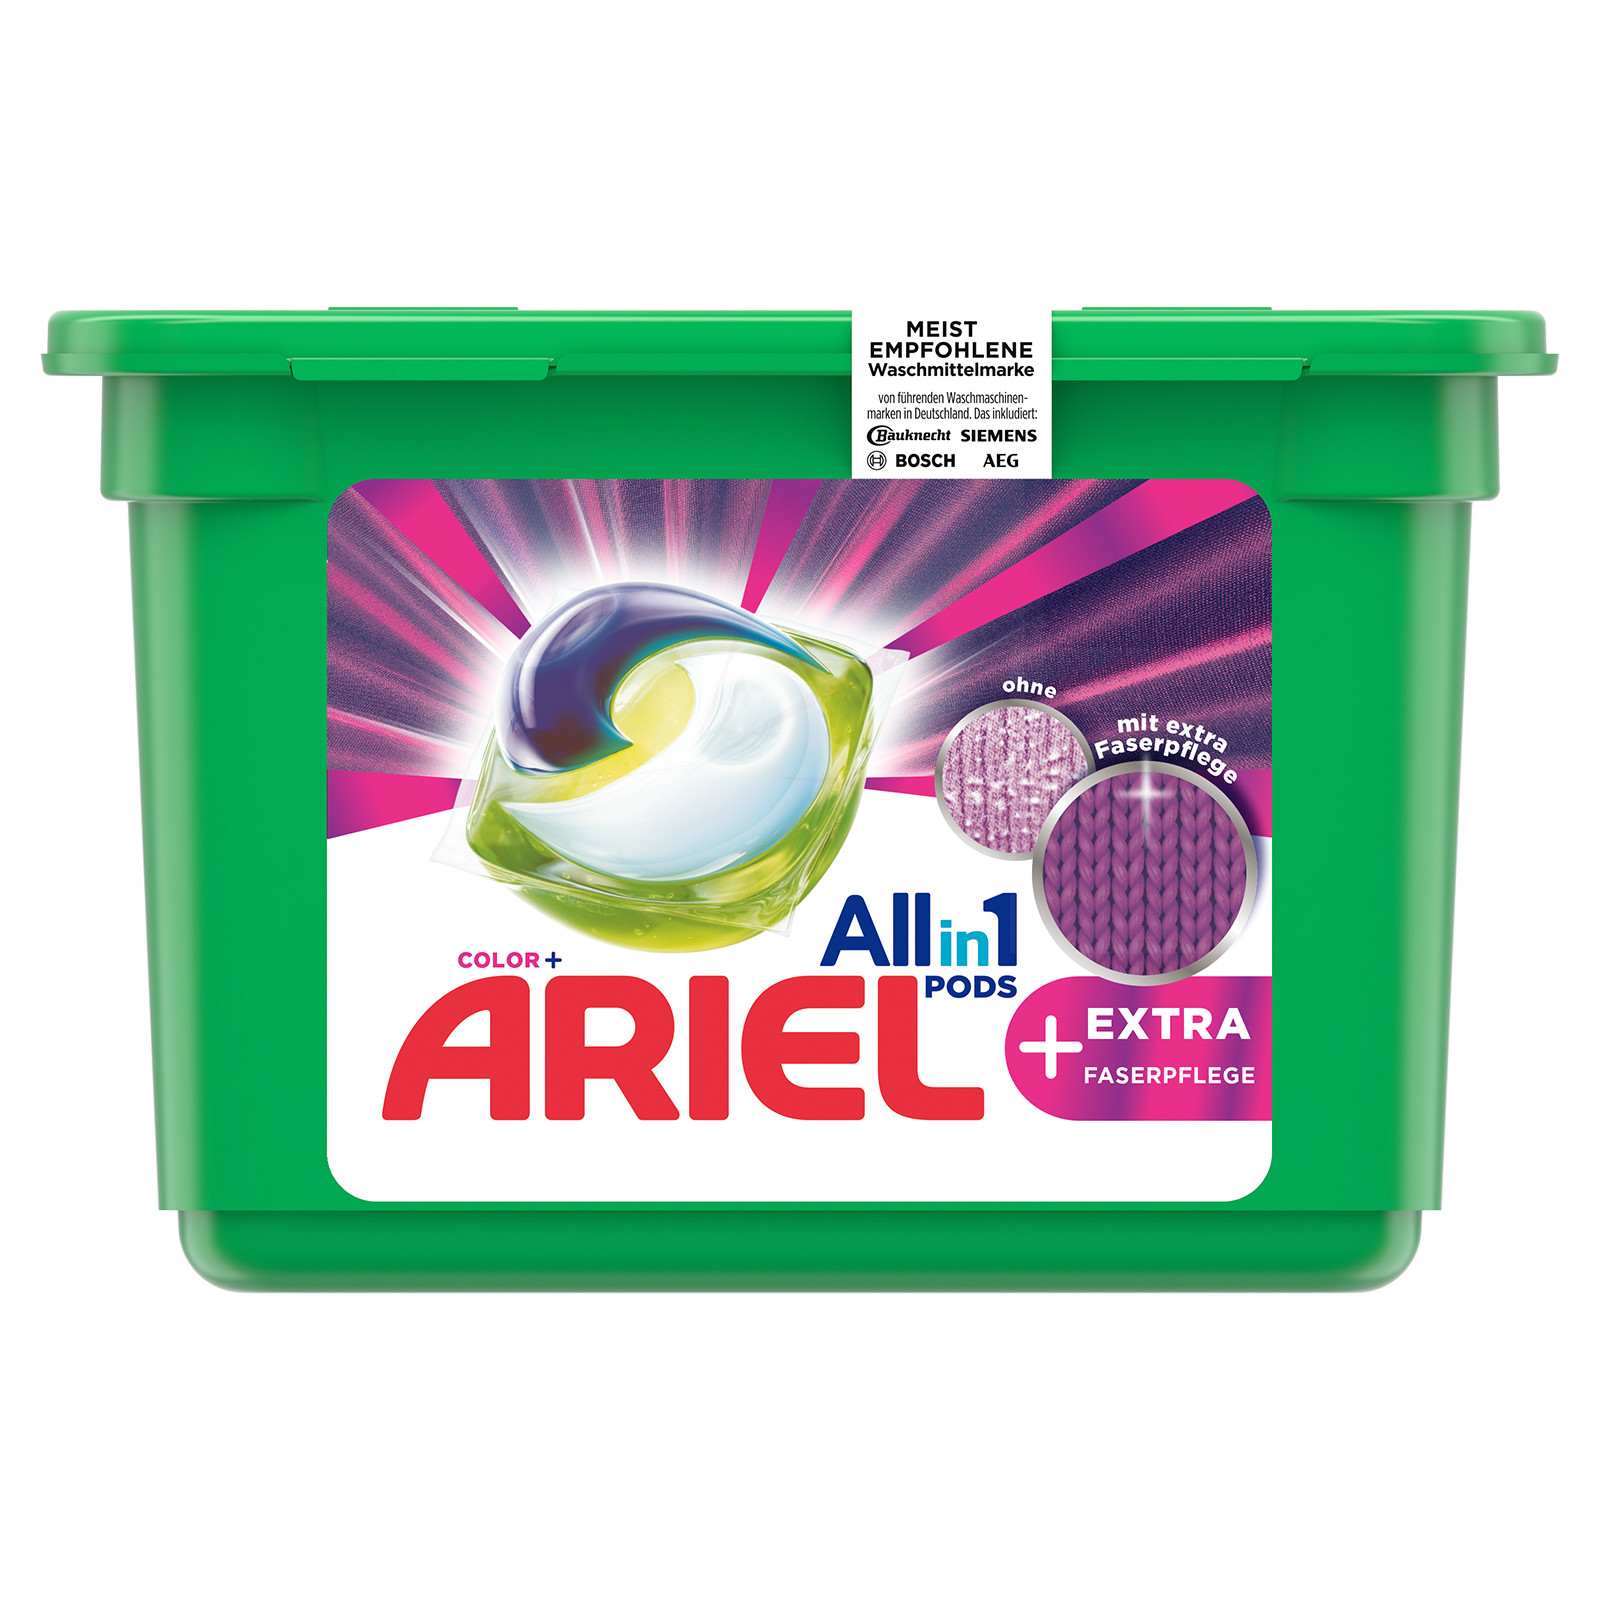 Ariel All-in-1 PODS Color + Extra Faserpflege